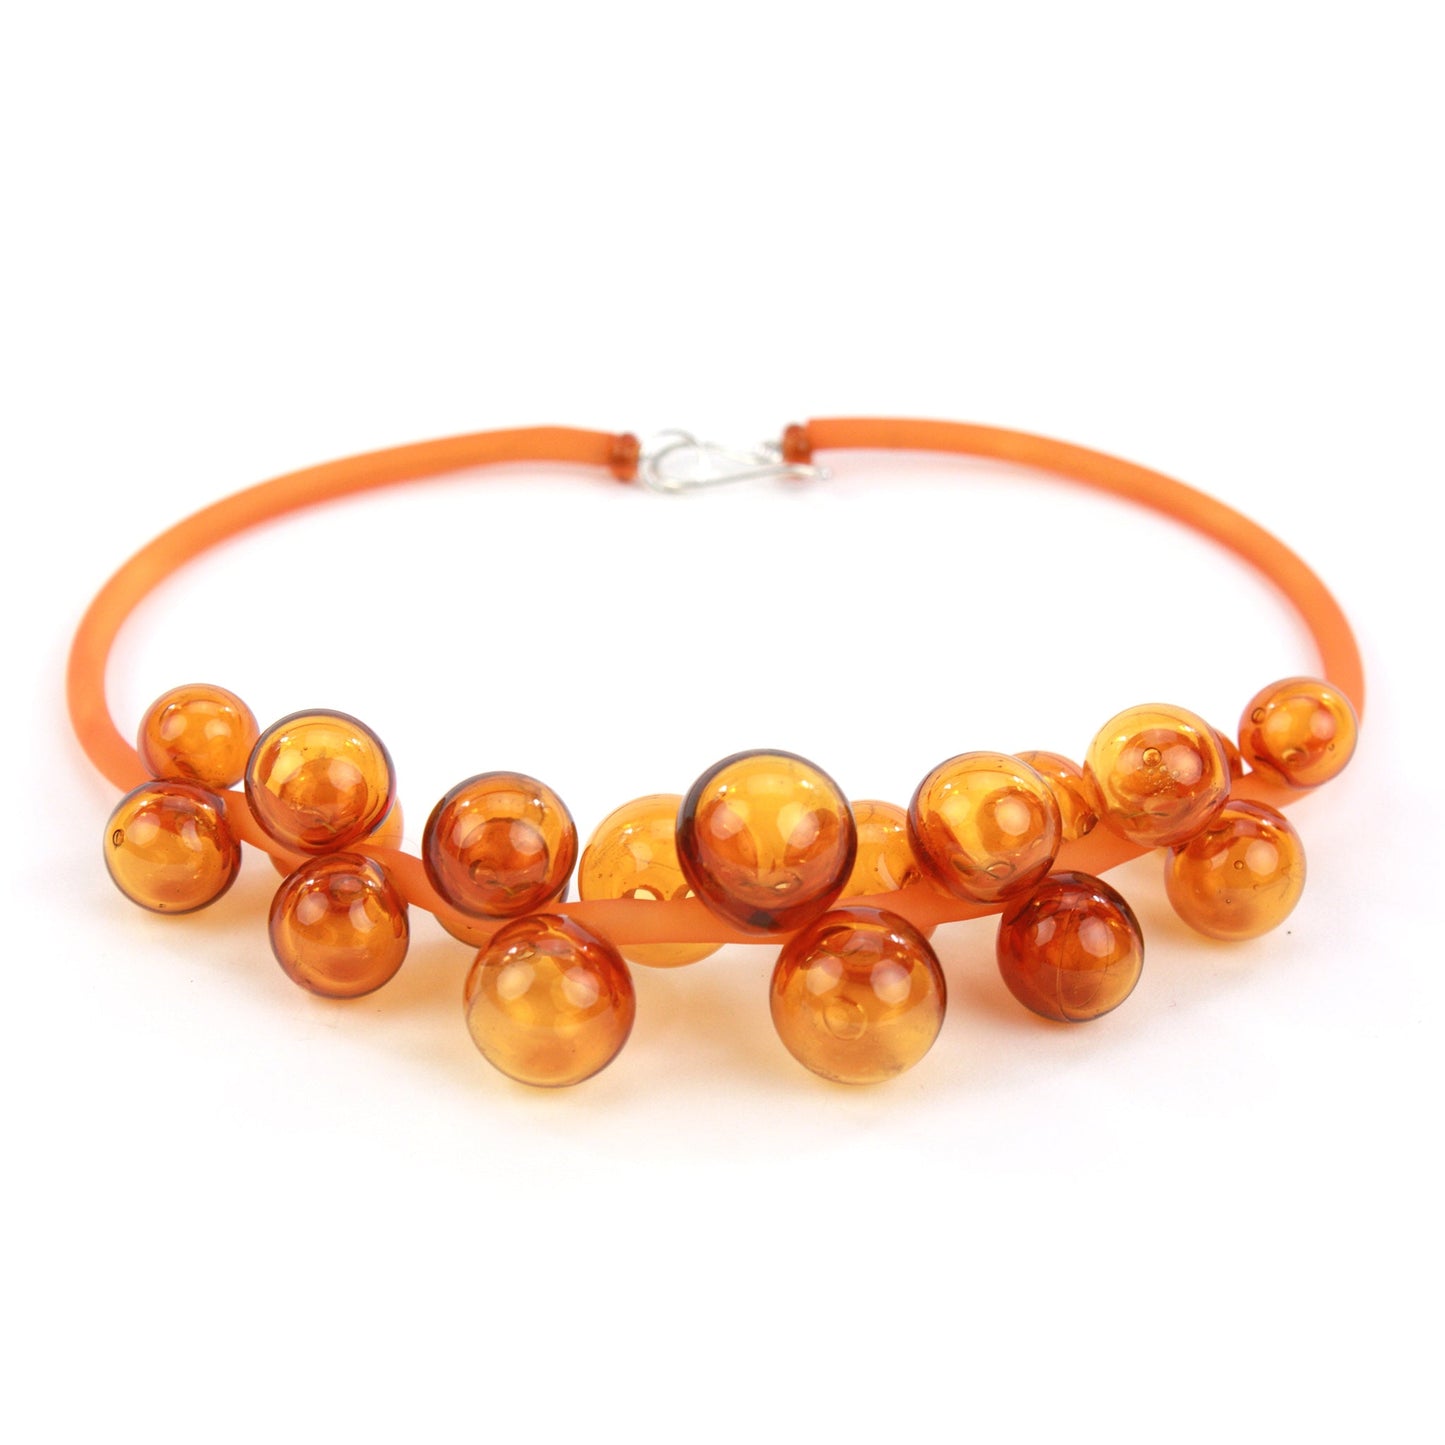 Chroma Bolla Necklace in Amber